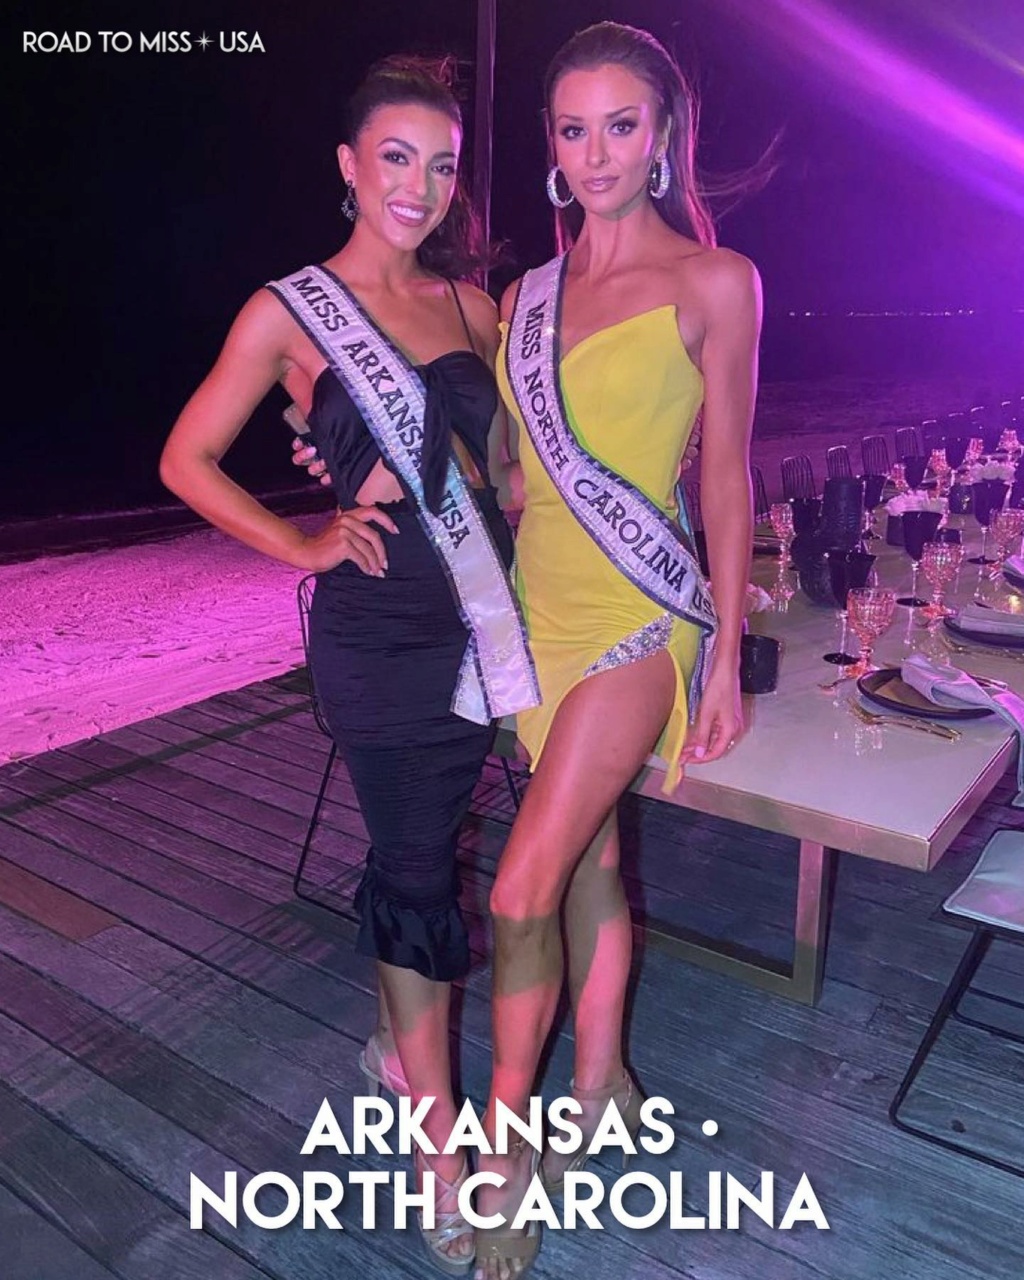 ROAD TO MISS USA 2021 is KENTUCKY! - Page 3 24201915